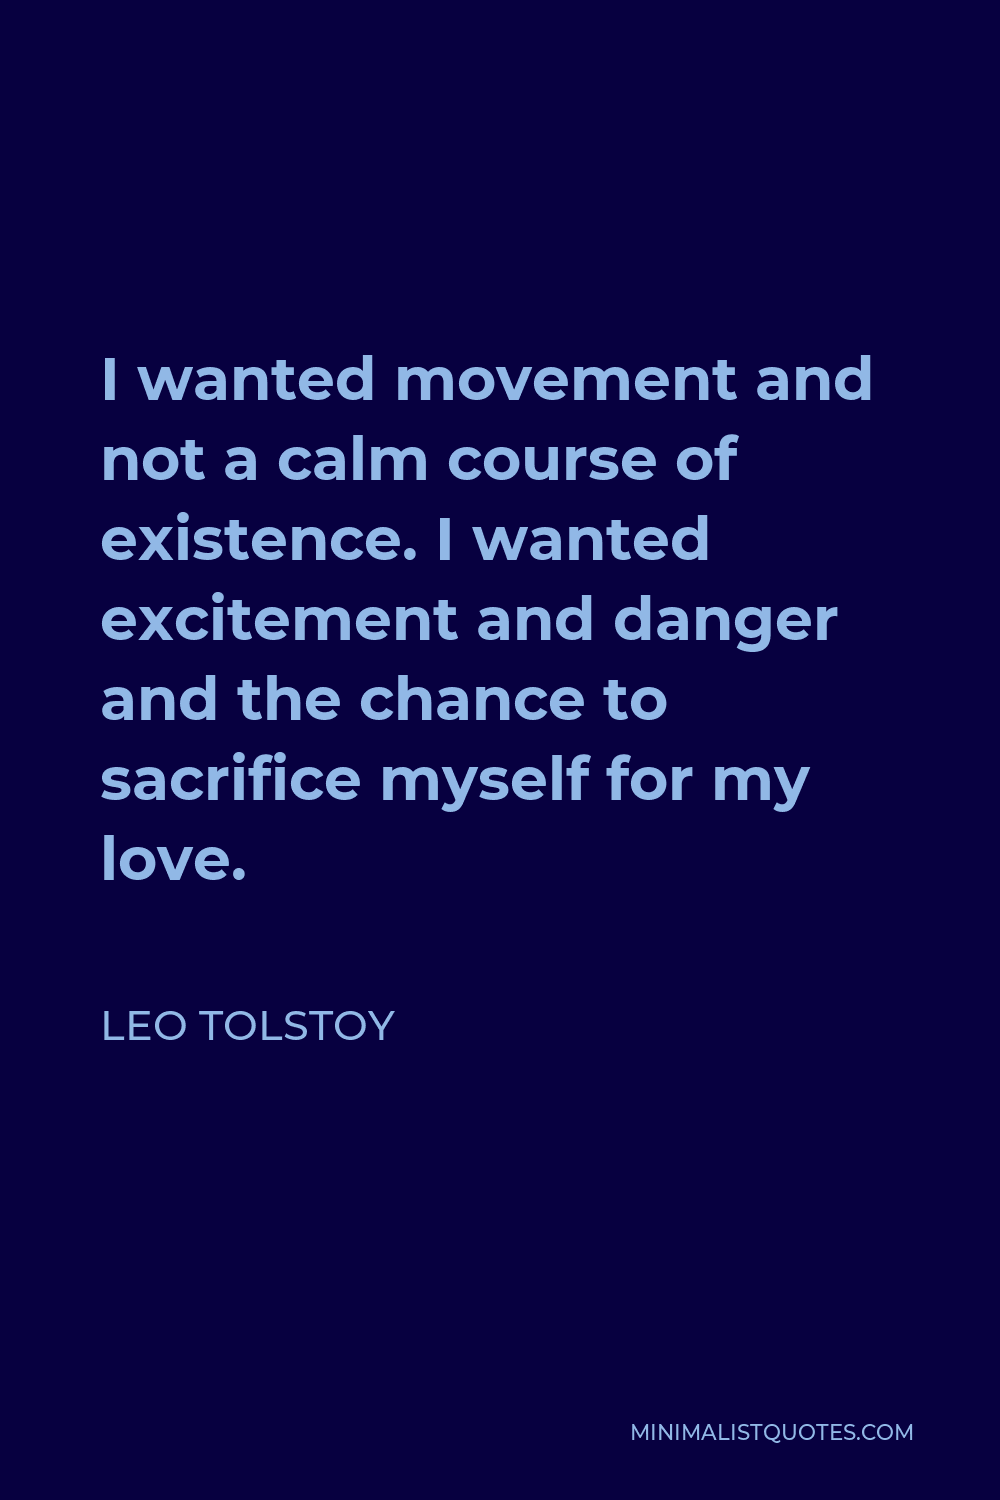 Leo Tolstoy Quote - I wanted movement and not a calm course of existence. I wanted excitement and danger and the chance to sacrifice myself for my love.